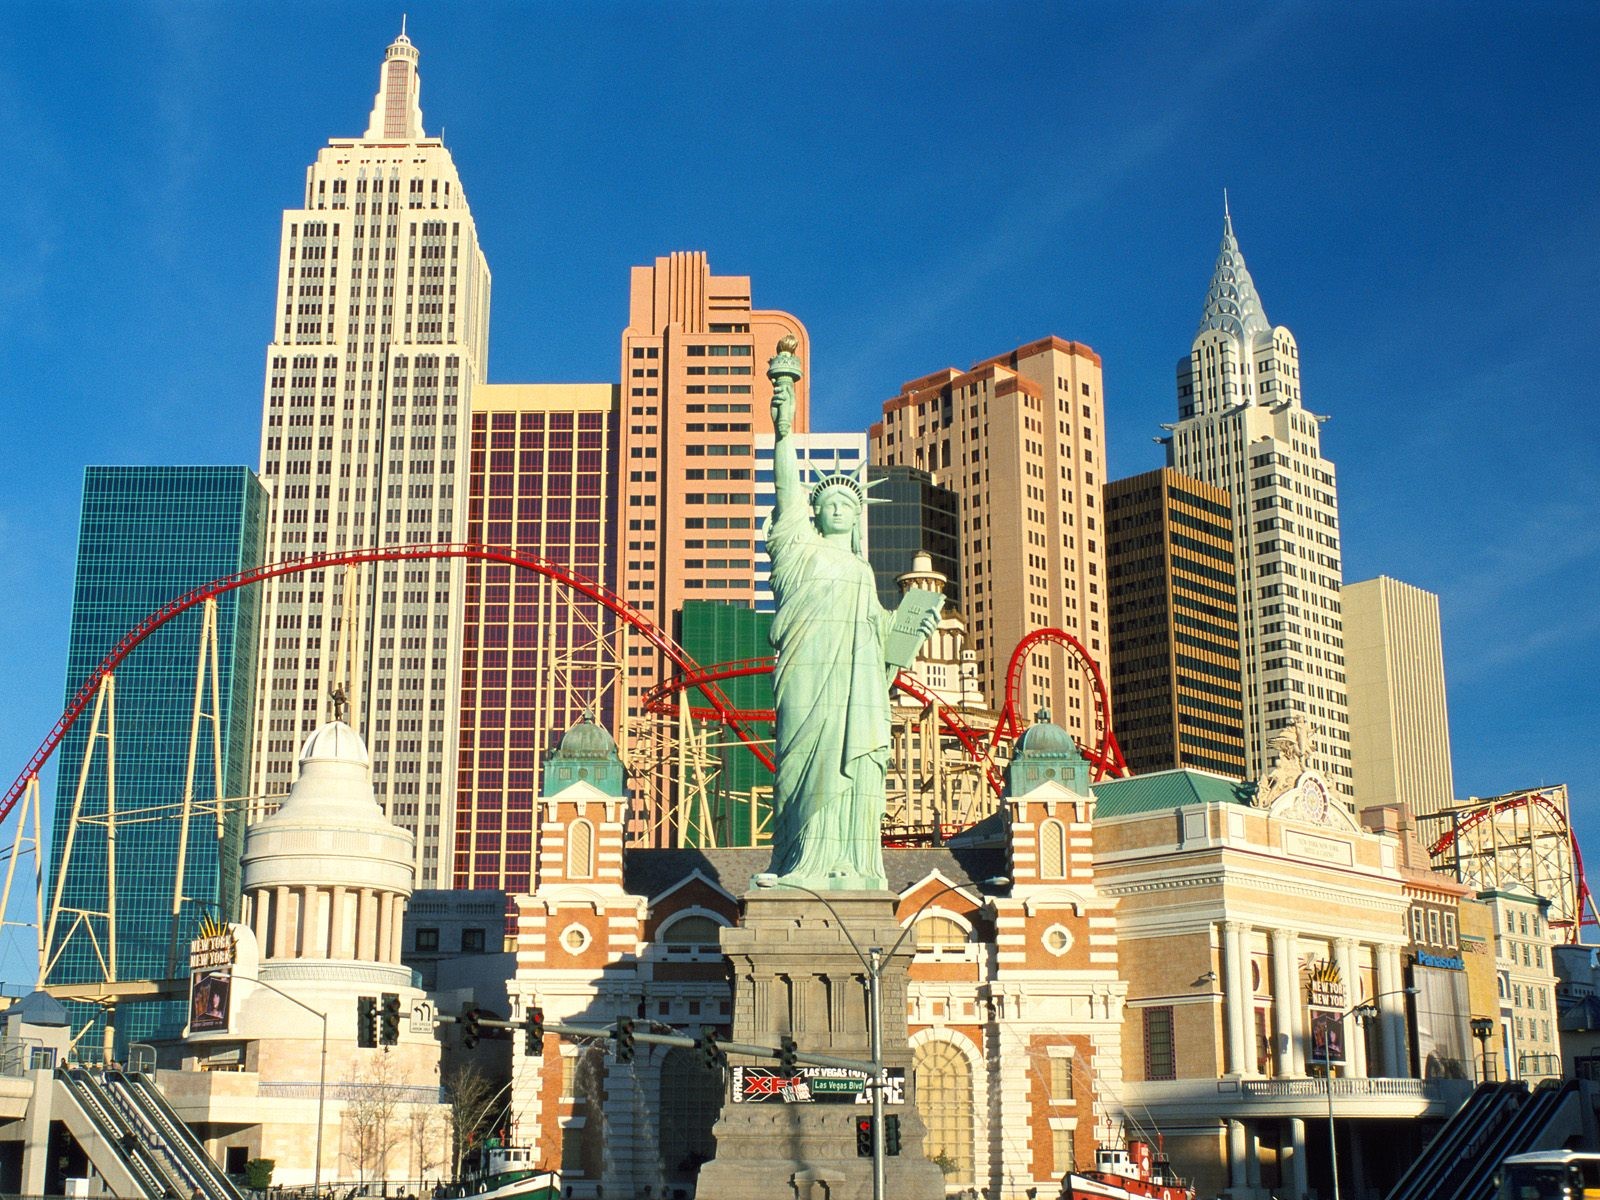 Las Vegas Hotel Architecture Statue Of Liberty Rollercoasters 1600x1200